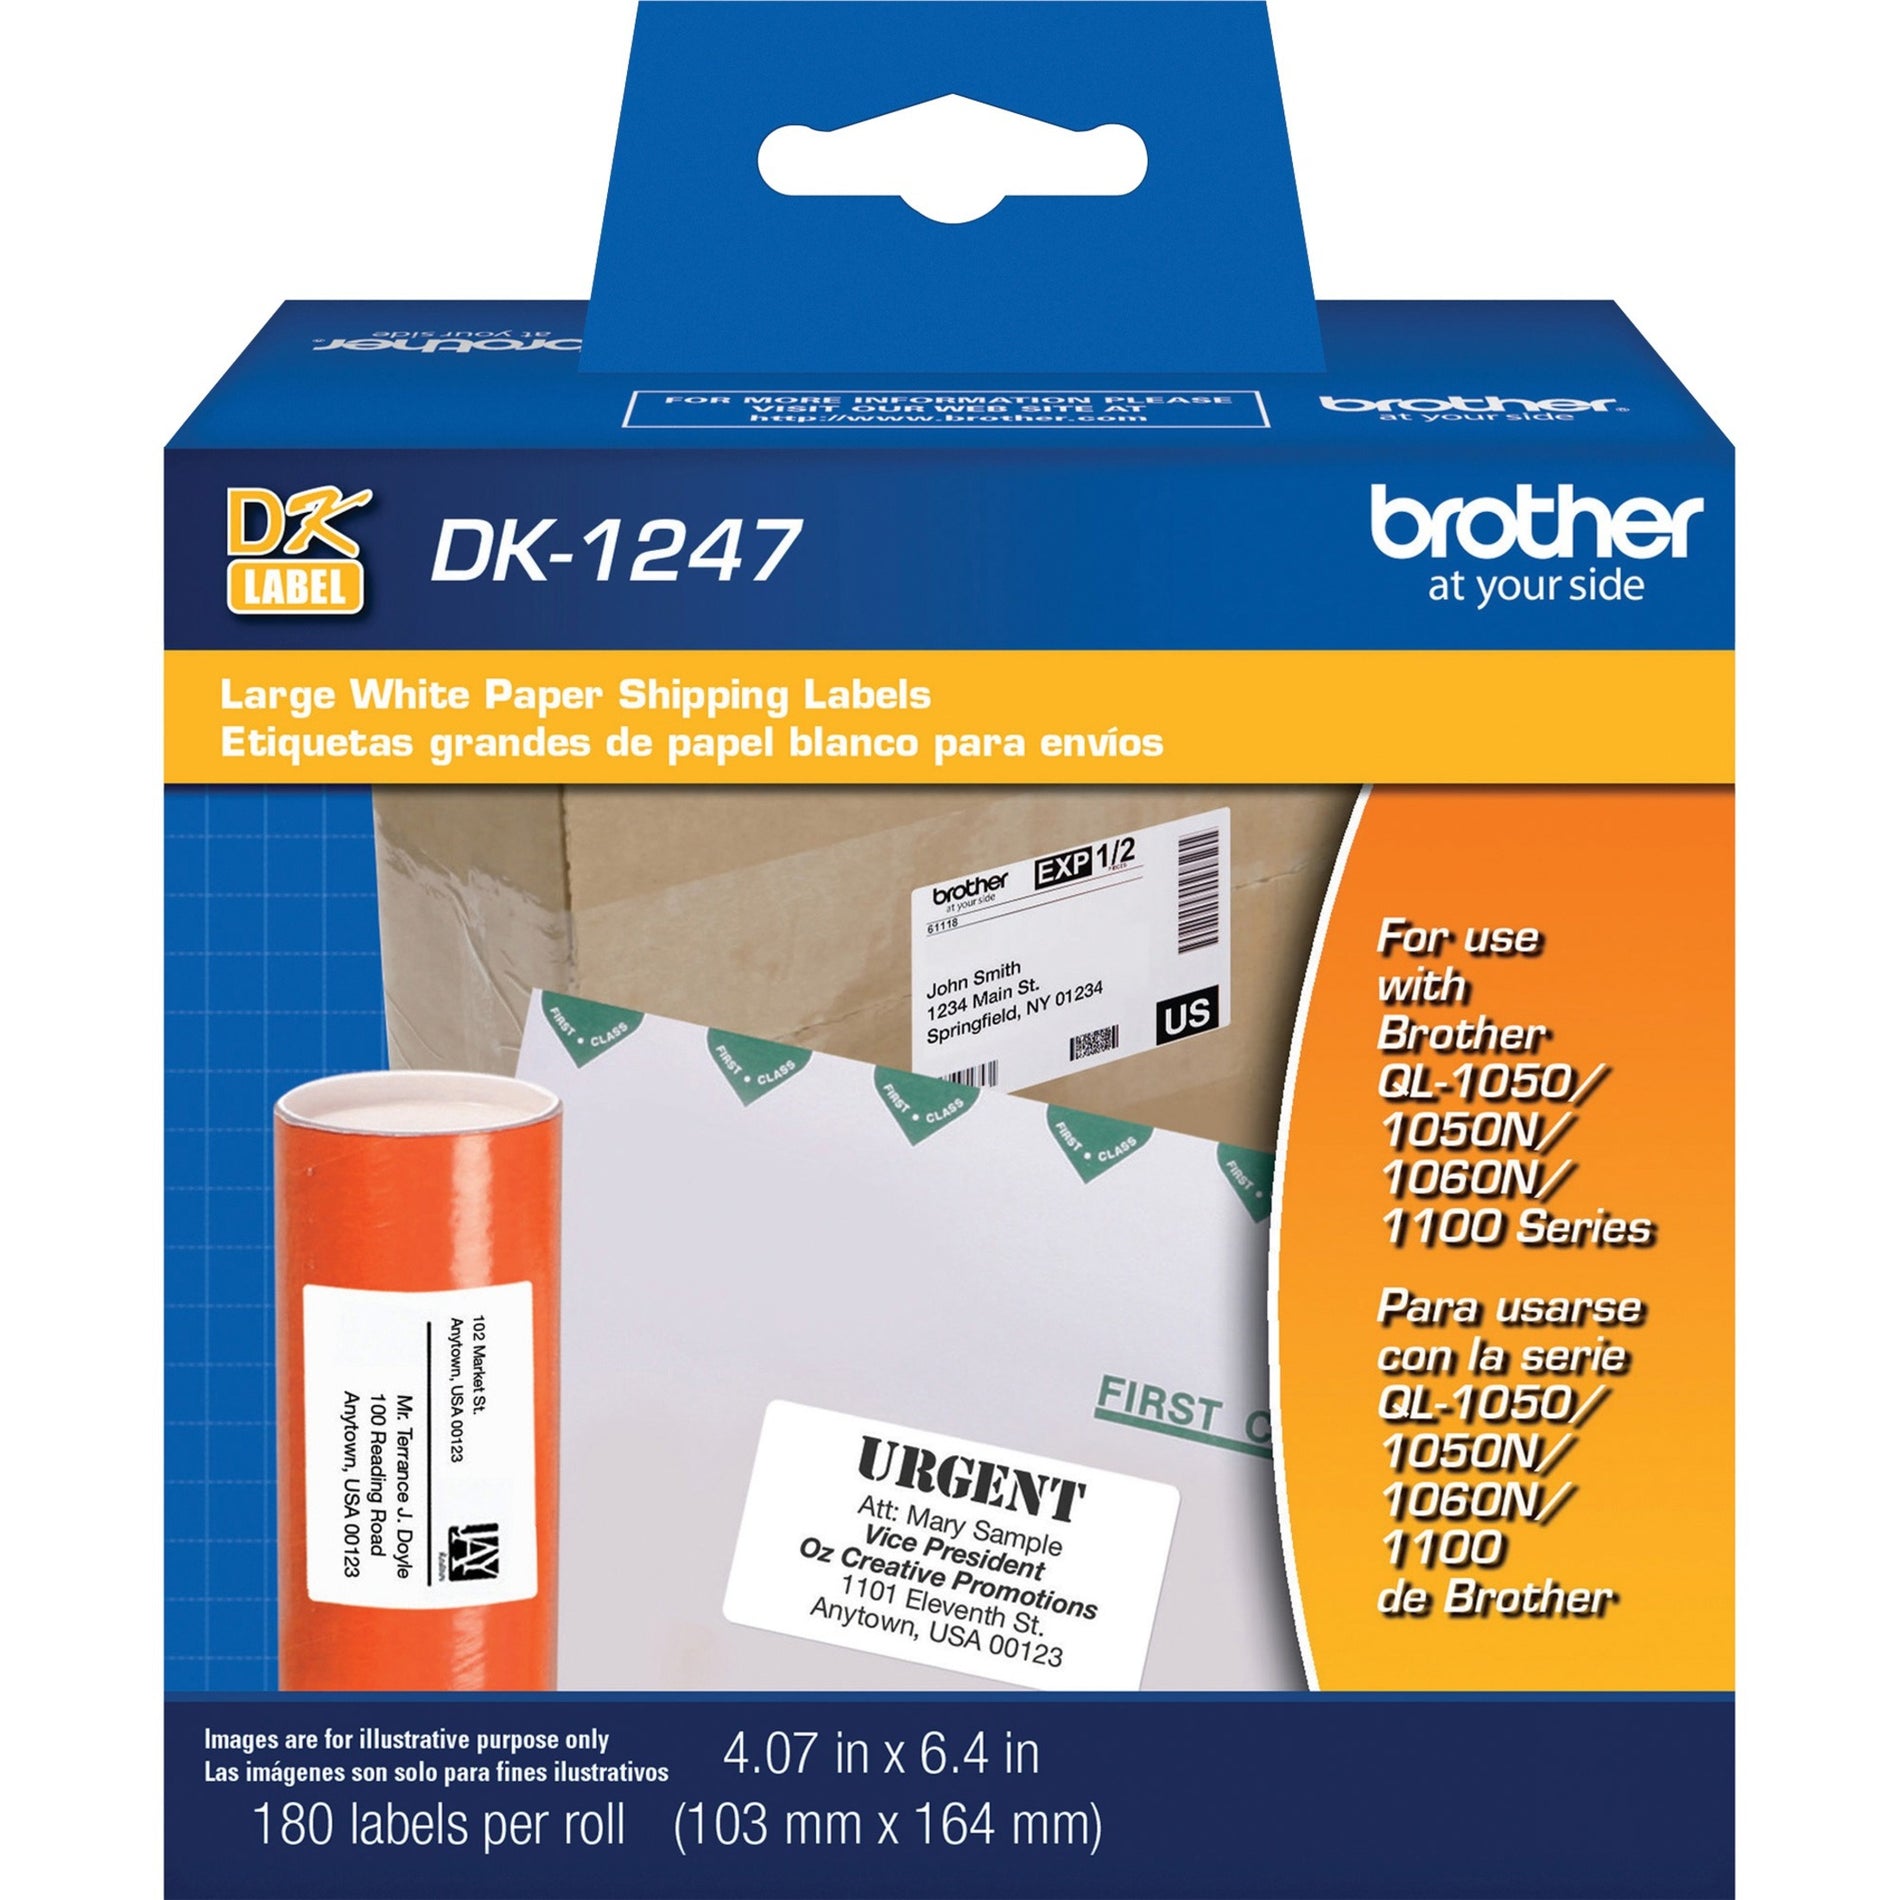 Brother DK1247 Shipping Label, Die-cut, 4 1/16" x 6 2/5", 180 Labels per Roll